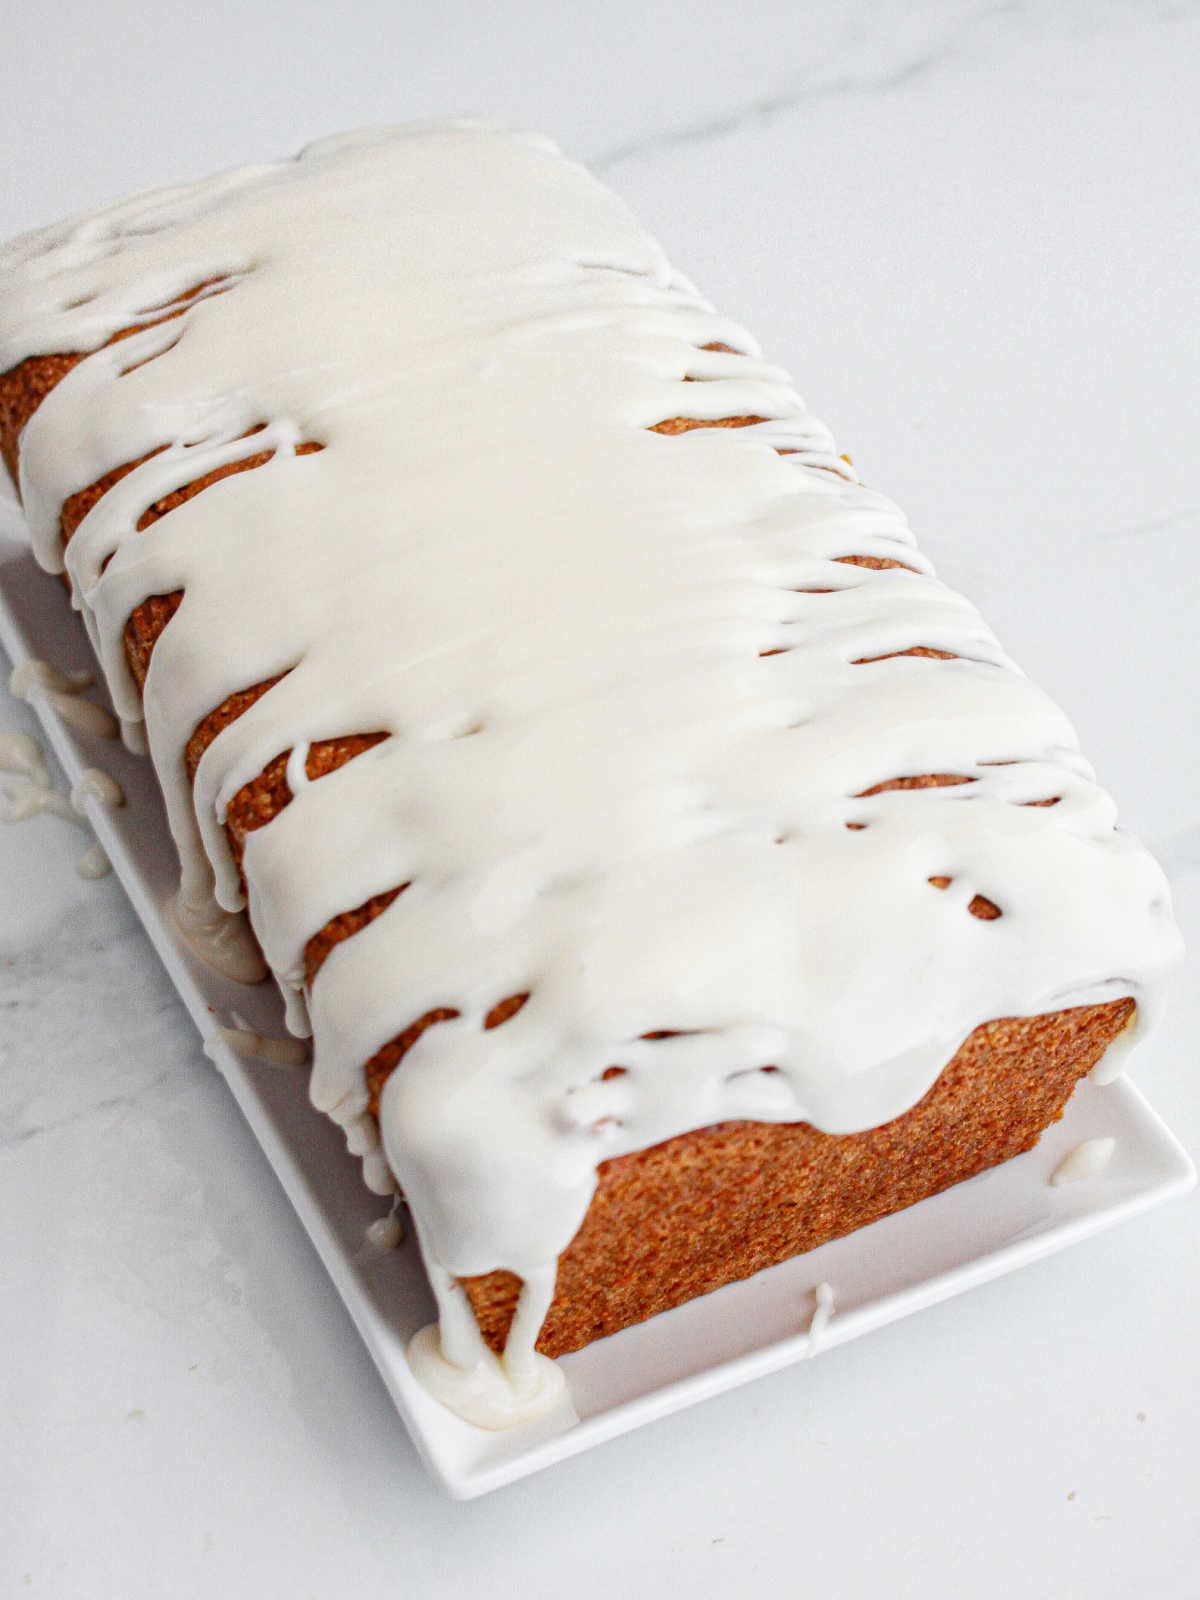 Loaf cake with glaze on a white dish. White marbled surface.